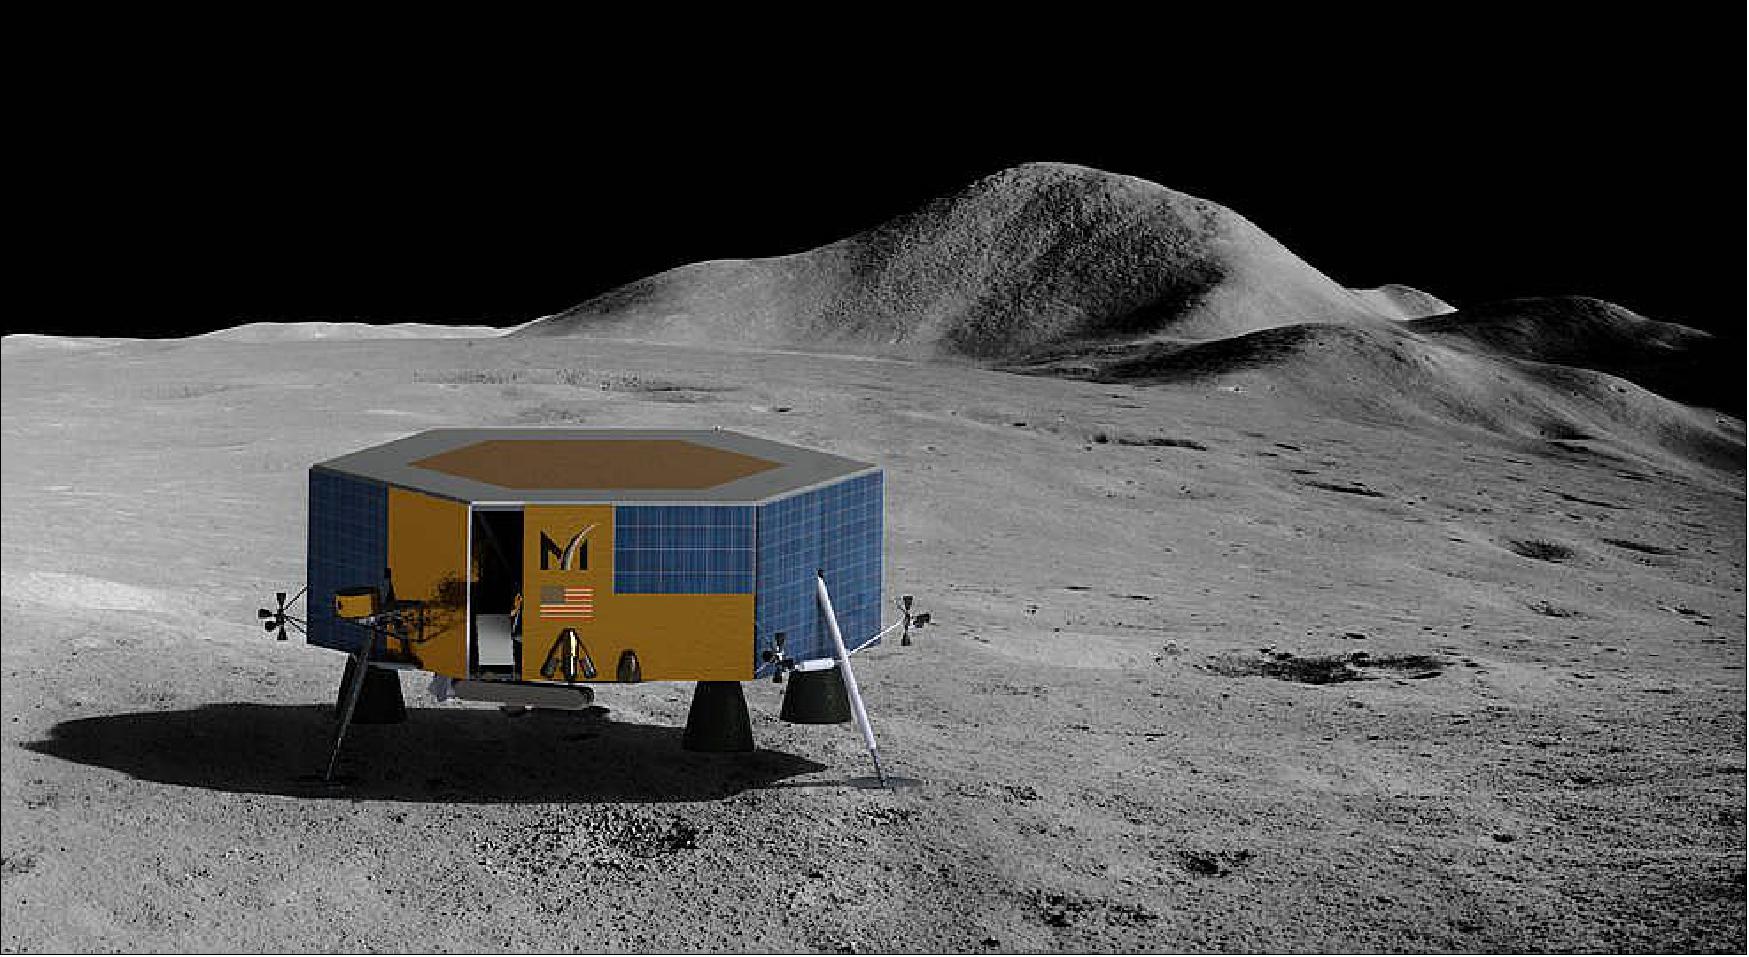 Figure 1: Masten’s XL-1 lunar lander will deliver science and technology payloads to the Moon’s South Pole in 2022 (image credit: Masten Space Systems)